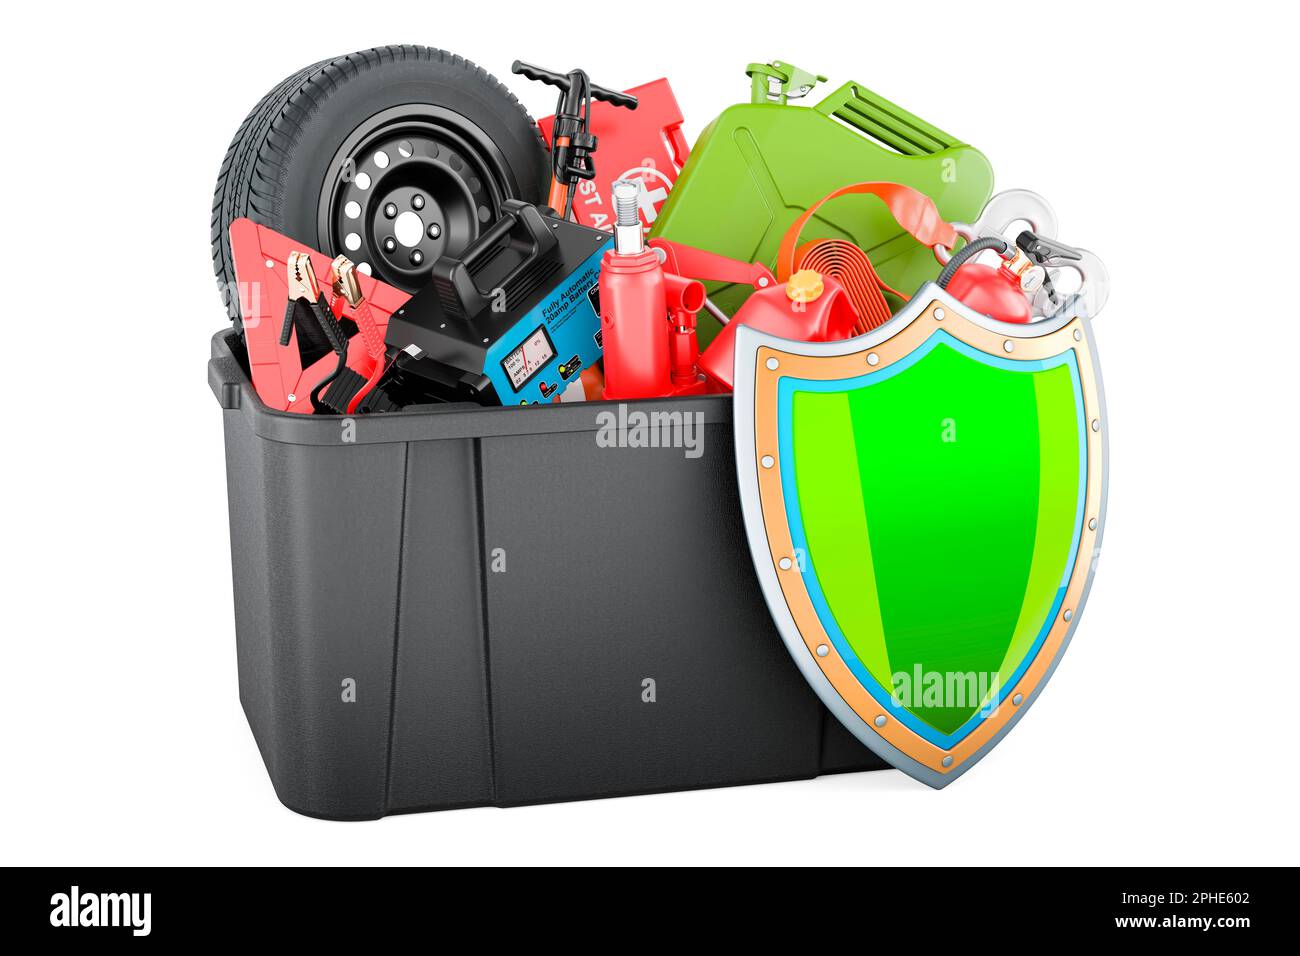 Plastic box full of car tools, equipment and accessories with shield. 3D rendering isolated on white background Stock Photo